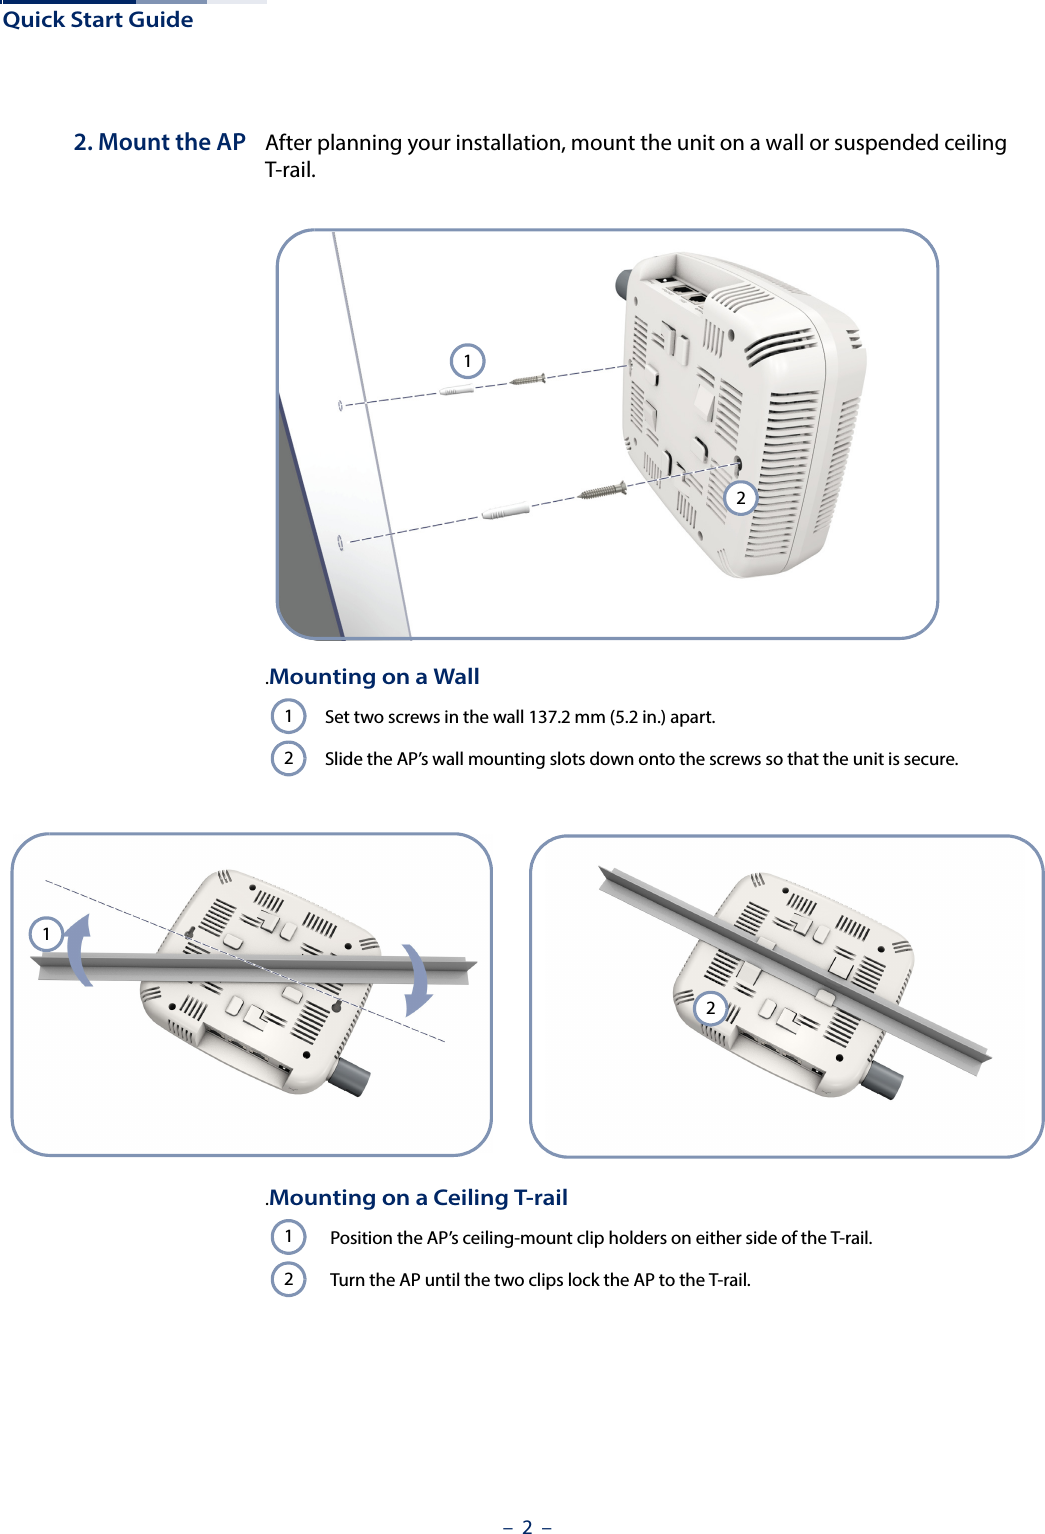 Quick Start Guide–  2  –2. Mount the AP After planning your installation, mount the unit on a wall or suspended ceiling T-rail. .Mounting on a WallSet two screws in the wall 137.2 mm (5.2 in.) apart.Slide the AP’s wall mounting slots down onto the screws so that the unit is secure.121212.Mounting on a Ceiling T-railPosition the AP’s ceiling-mount clip holders on either side of the T-rail.Turn the AP until the two clips lock the AP to the T-rail.12